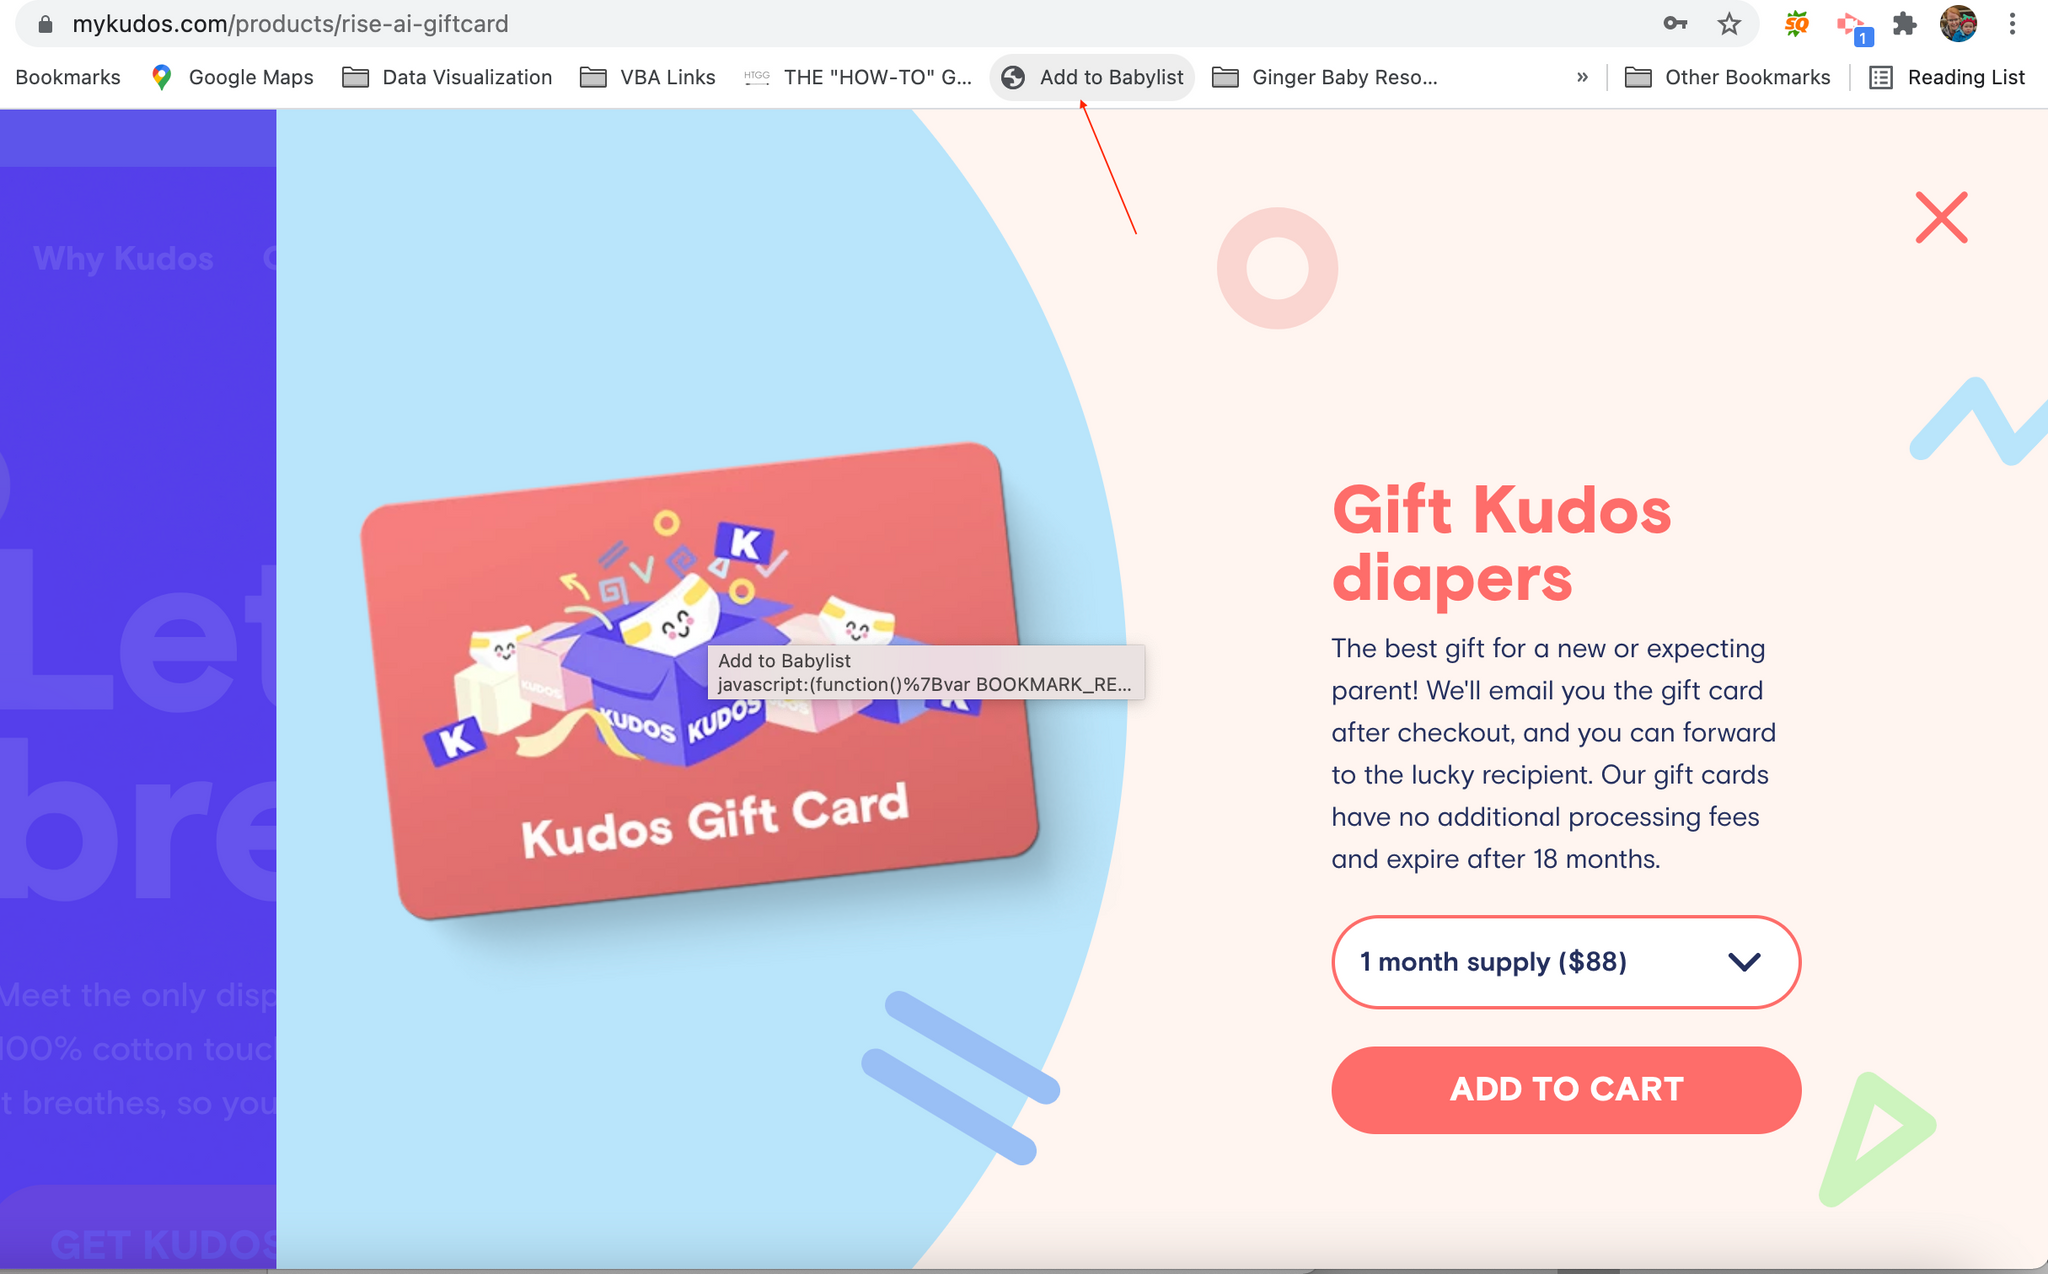 Clicking the add to babylist button to put Kudos diapers on baby registry